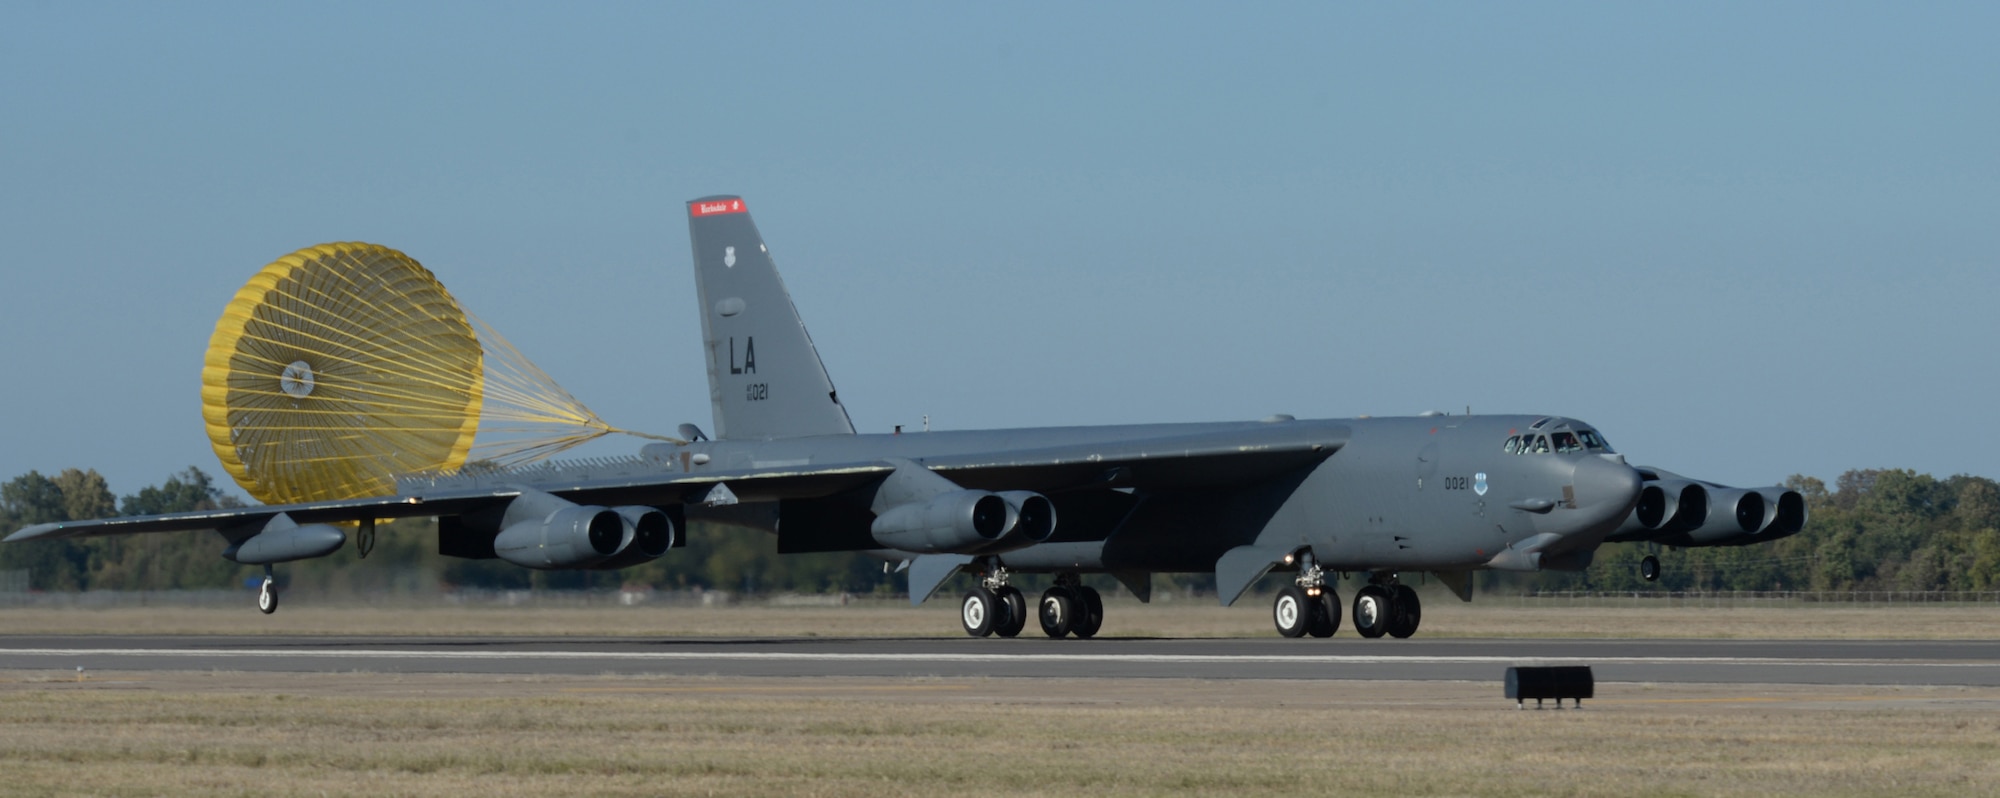 A B-52H Stratofortress lands during Global Thunder 15 on Barksdale Air Force Base, La., Oct. 26, 2014. Global Thunder is a U.S. Strategic Command annual field training and battle staff exercise designed to exercise all mission areas with primary emphasis on nuclear command, control and communications. This exercise provides training opportunities for components, task forces, units, and command posts to deter, and if necessary, defeat a military attack against the United States and to employ forces as directed by the president. (U.S. Air Force photo/Airman 1st Class Curt Beach)